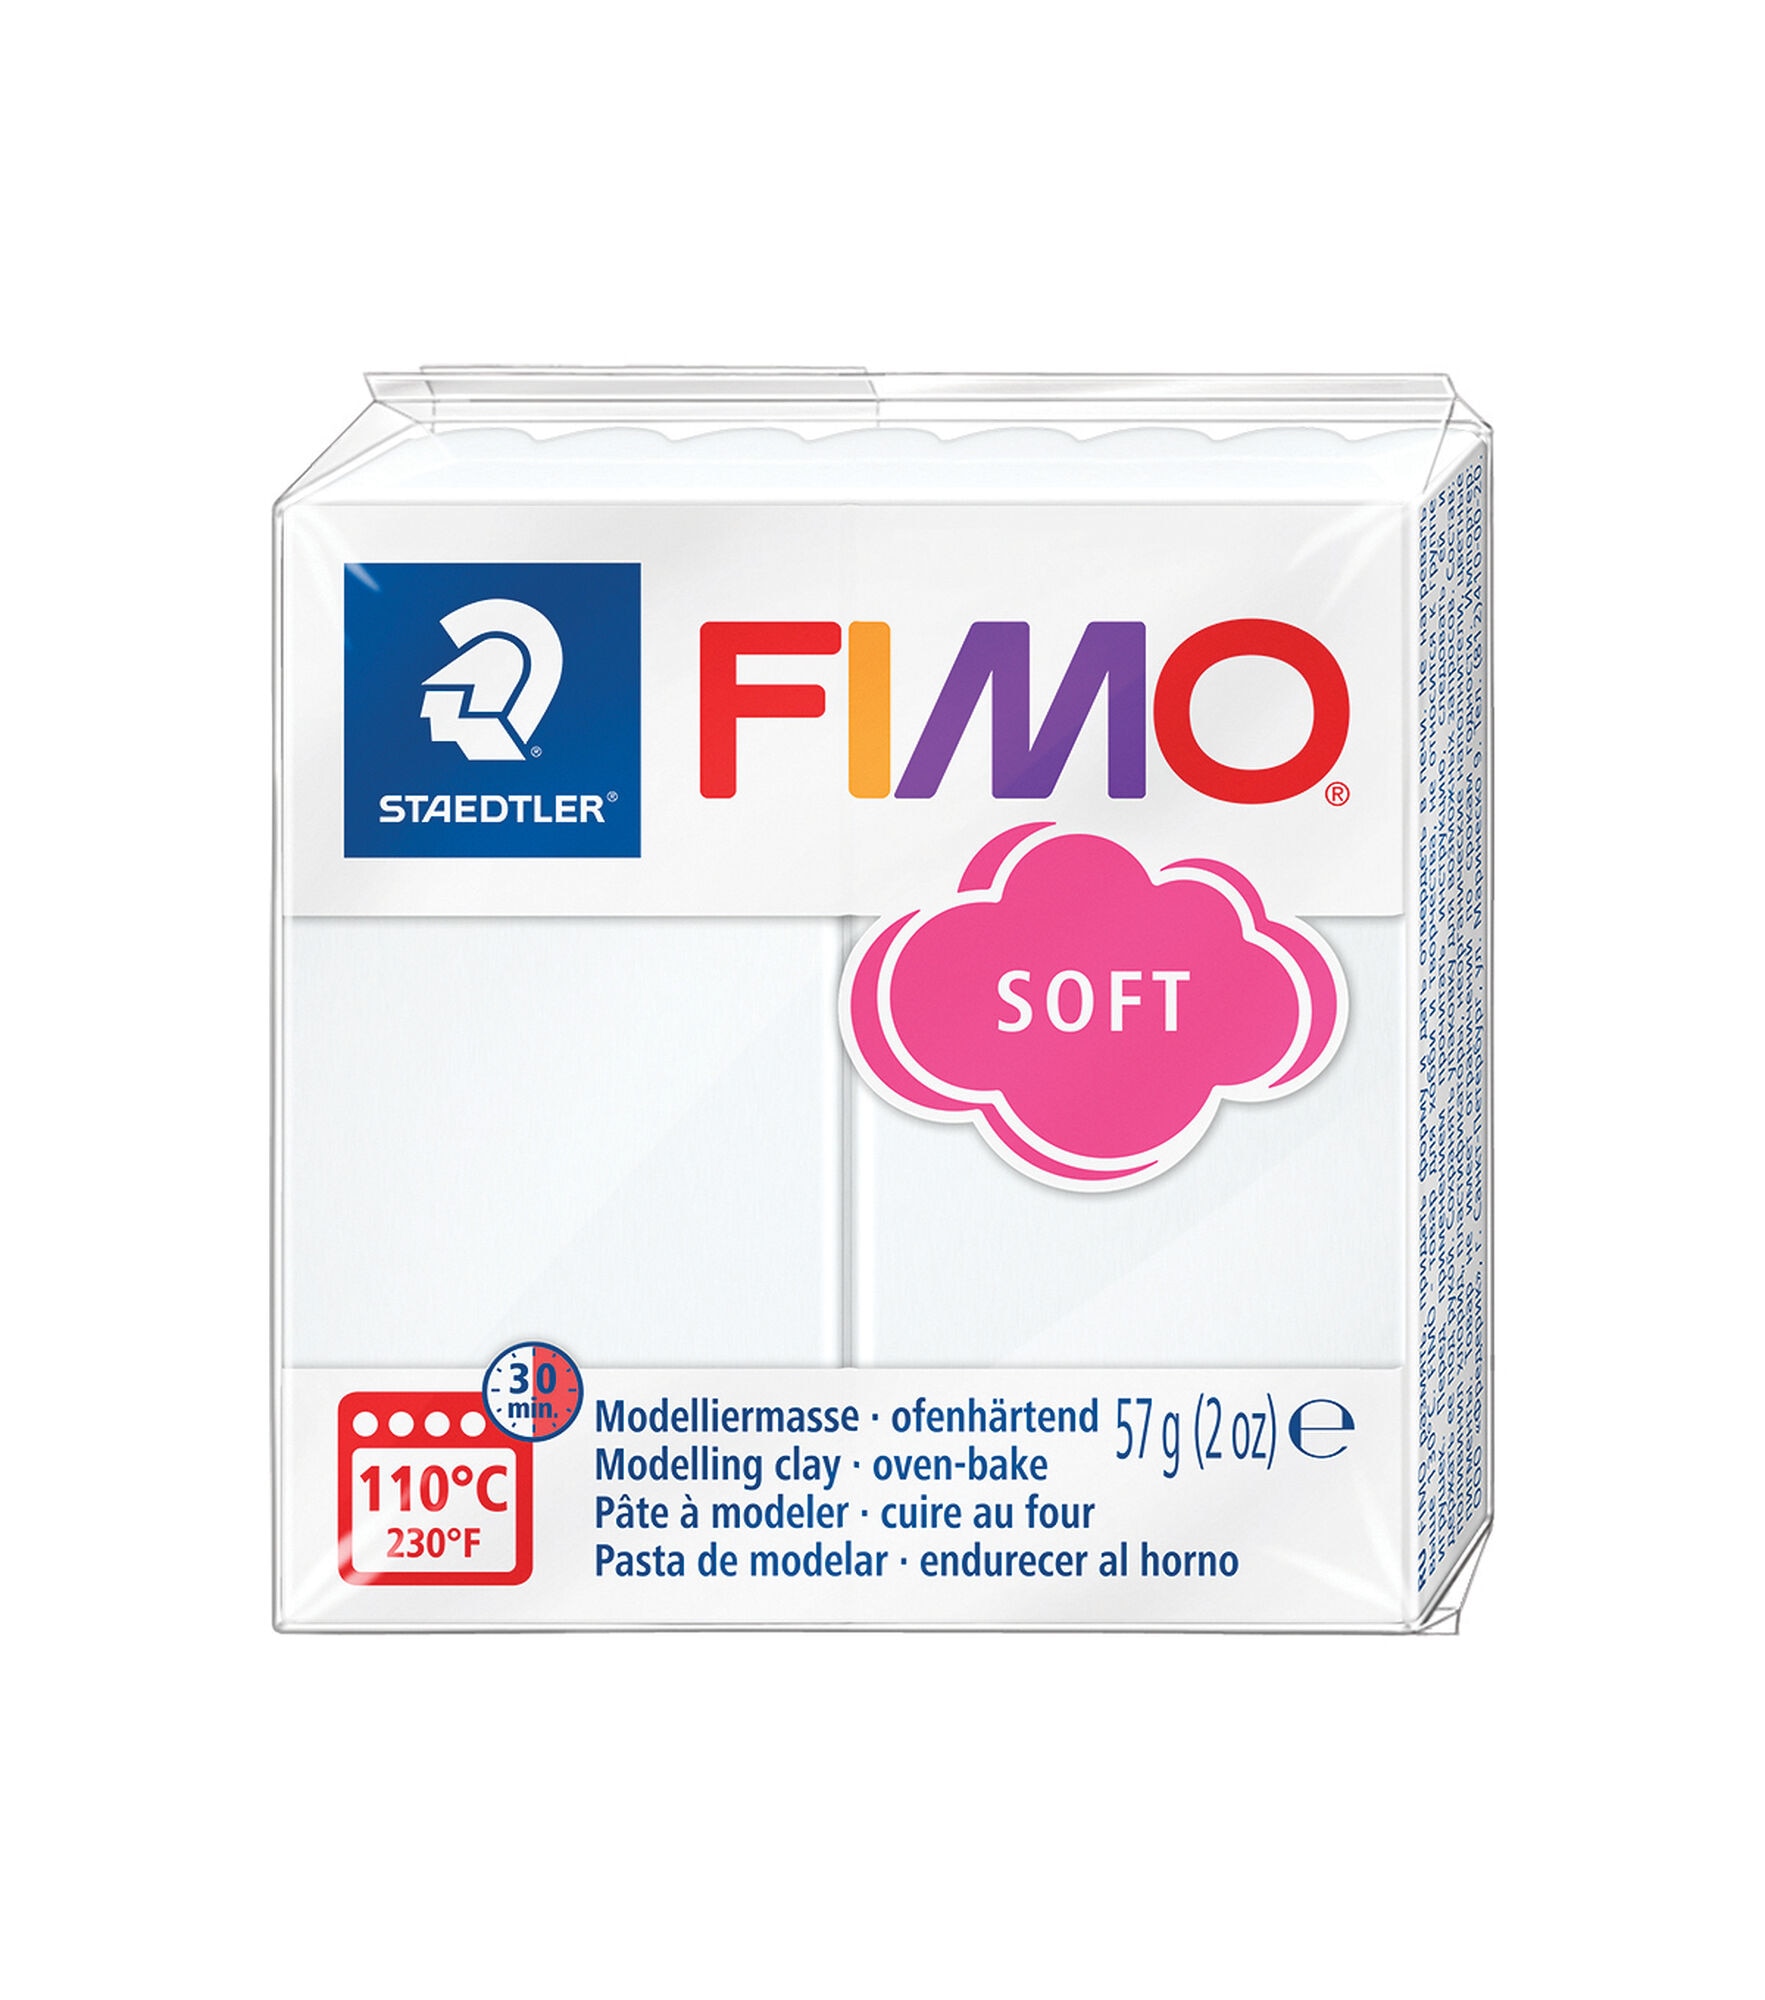 Staedtler Fimo Soft Polymer Clay - 2 oz, Pale Pink